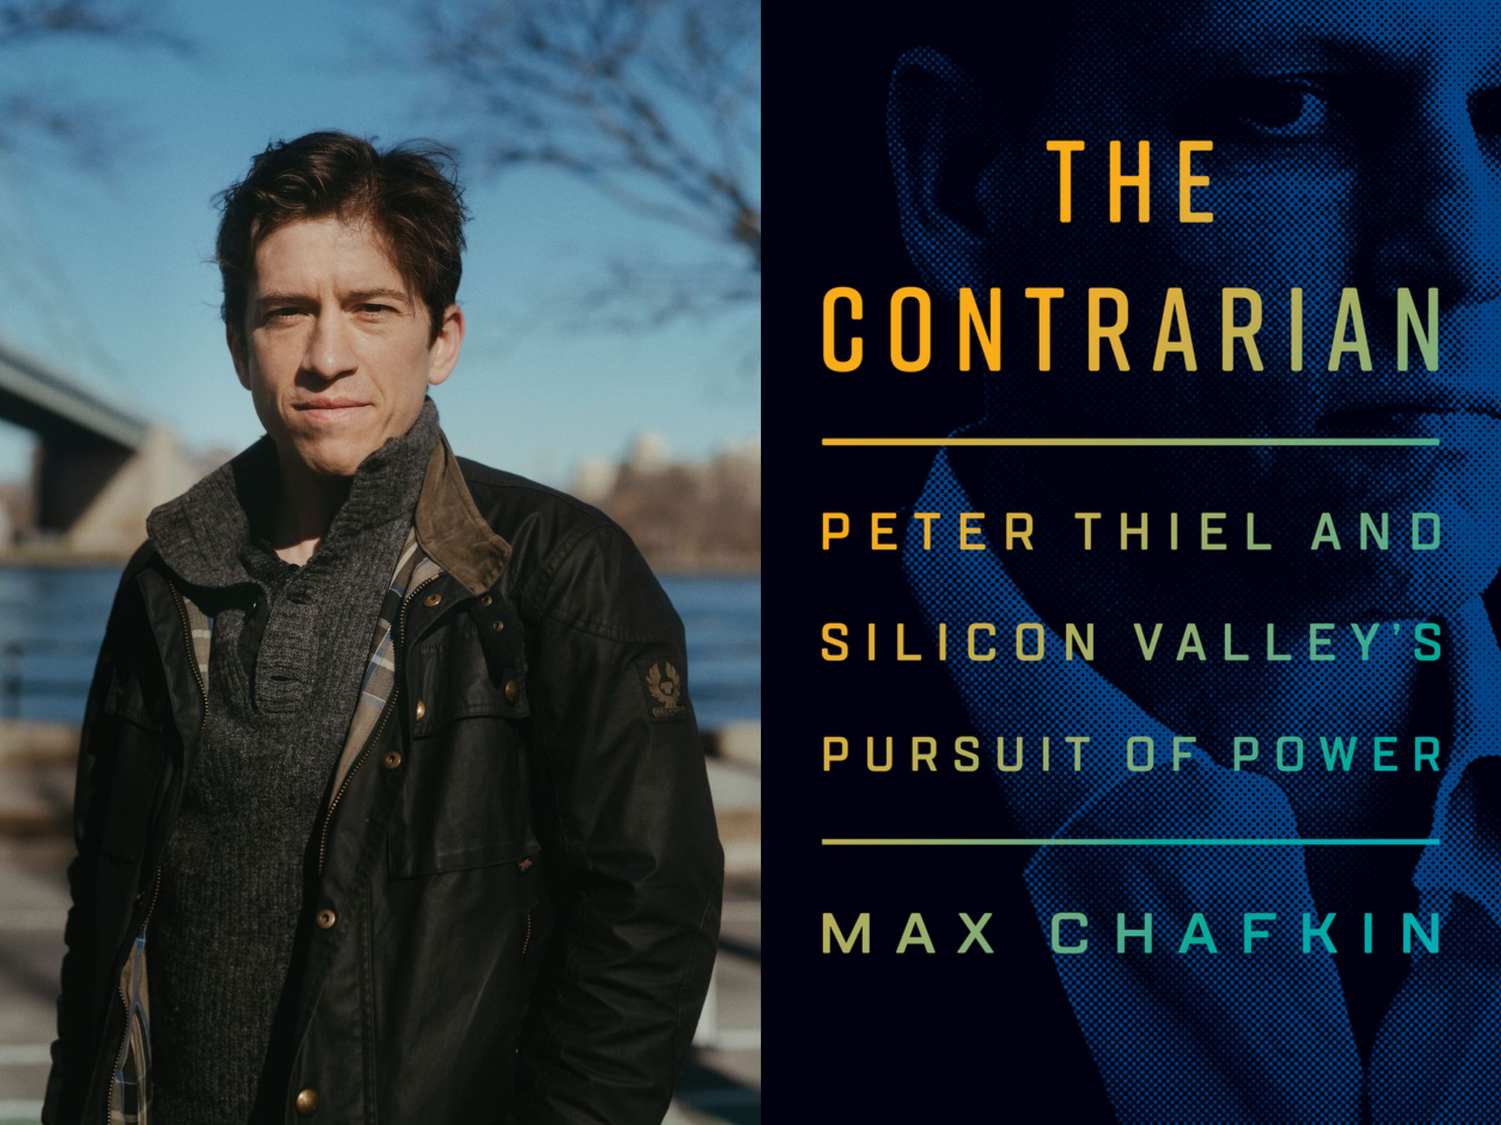 Max Chafkin and The Contrarian book cover